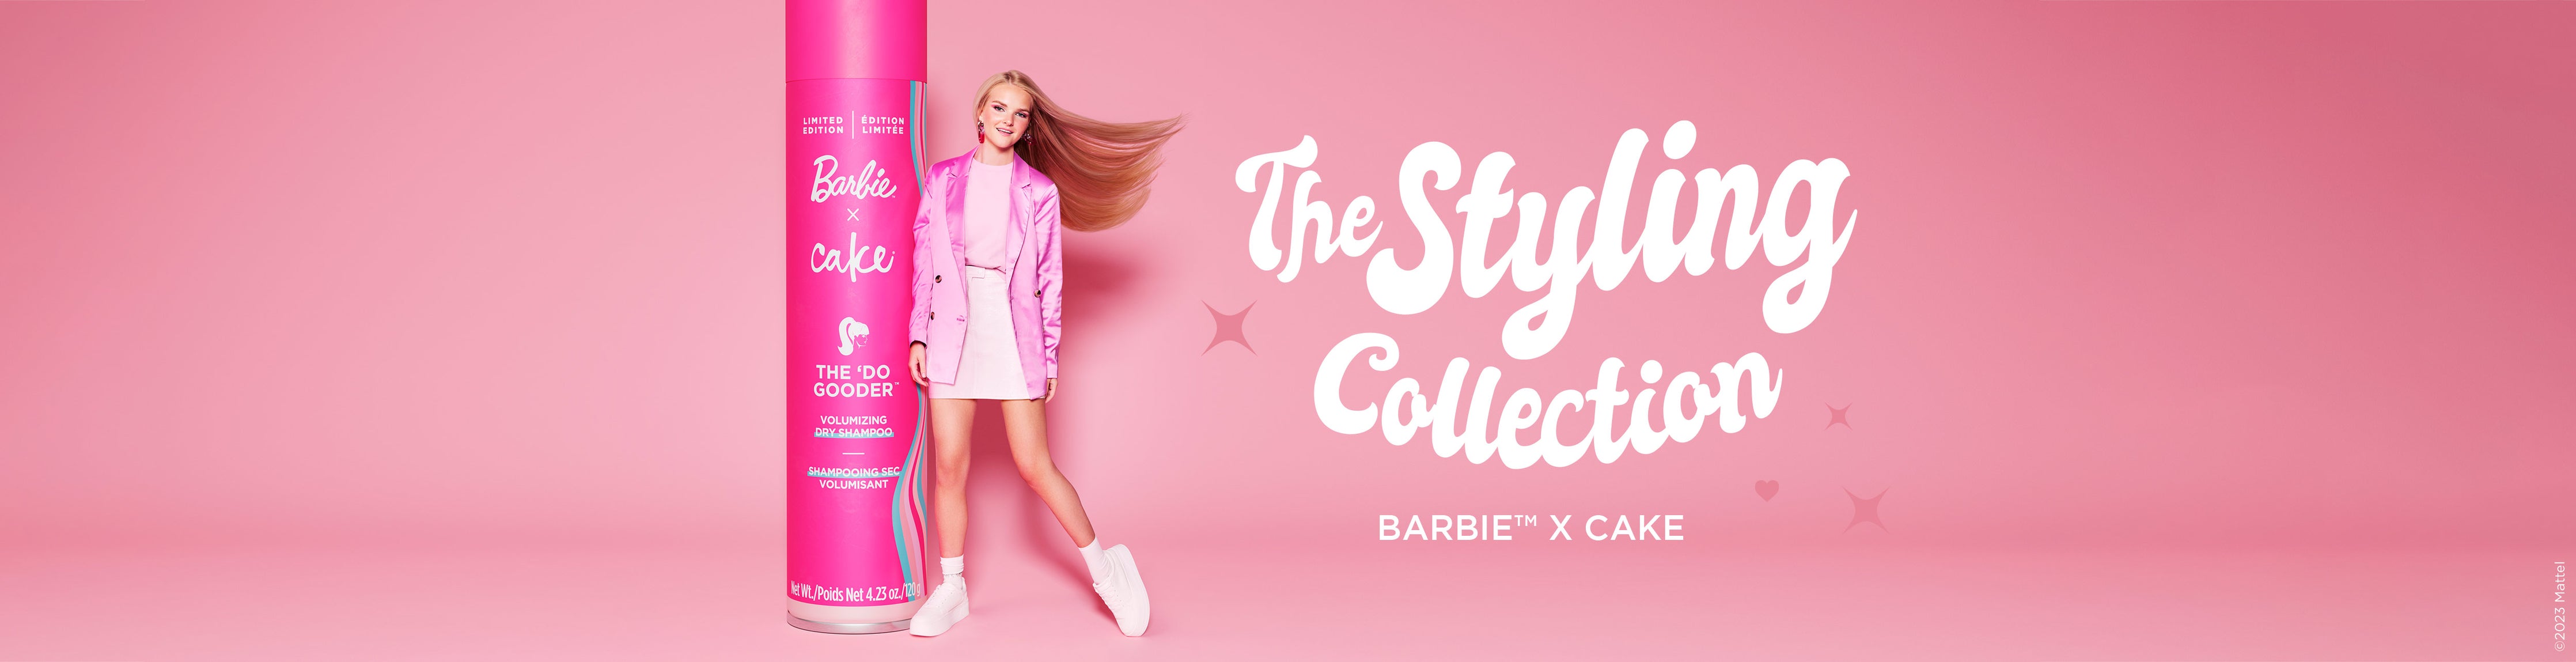 Barbie x Cake Styling Collection